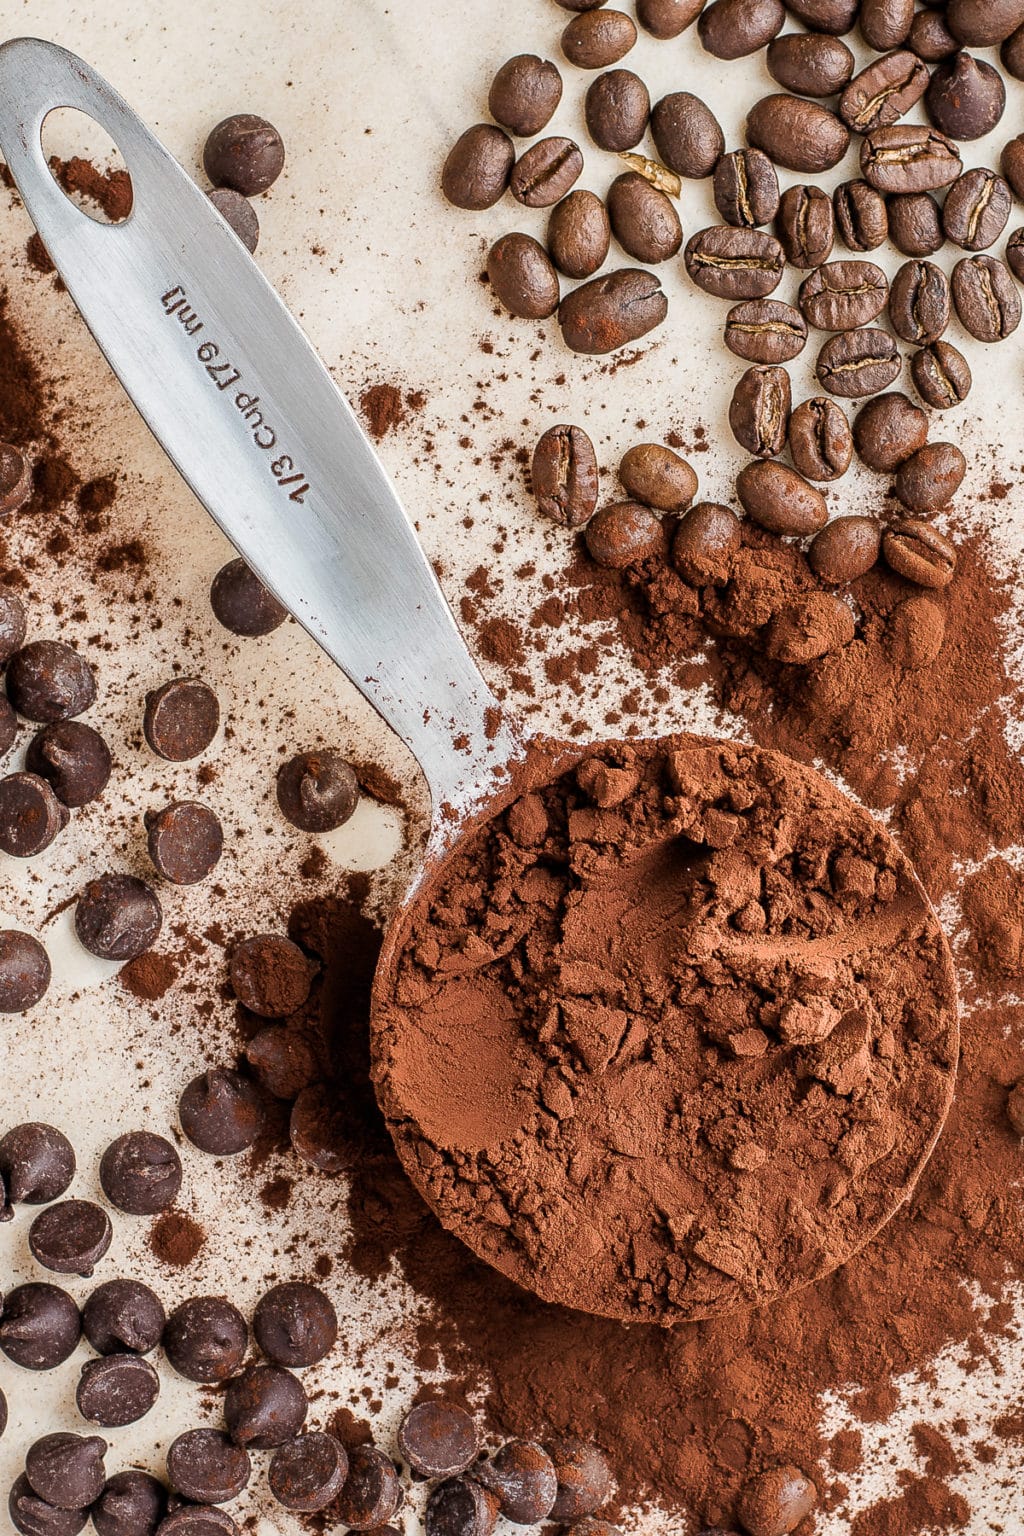 A scoop full of cocoa powder with chocolate chips scattered around it.